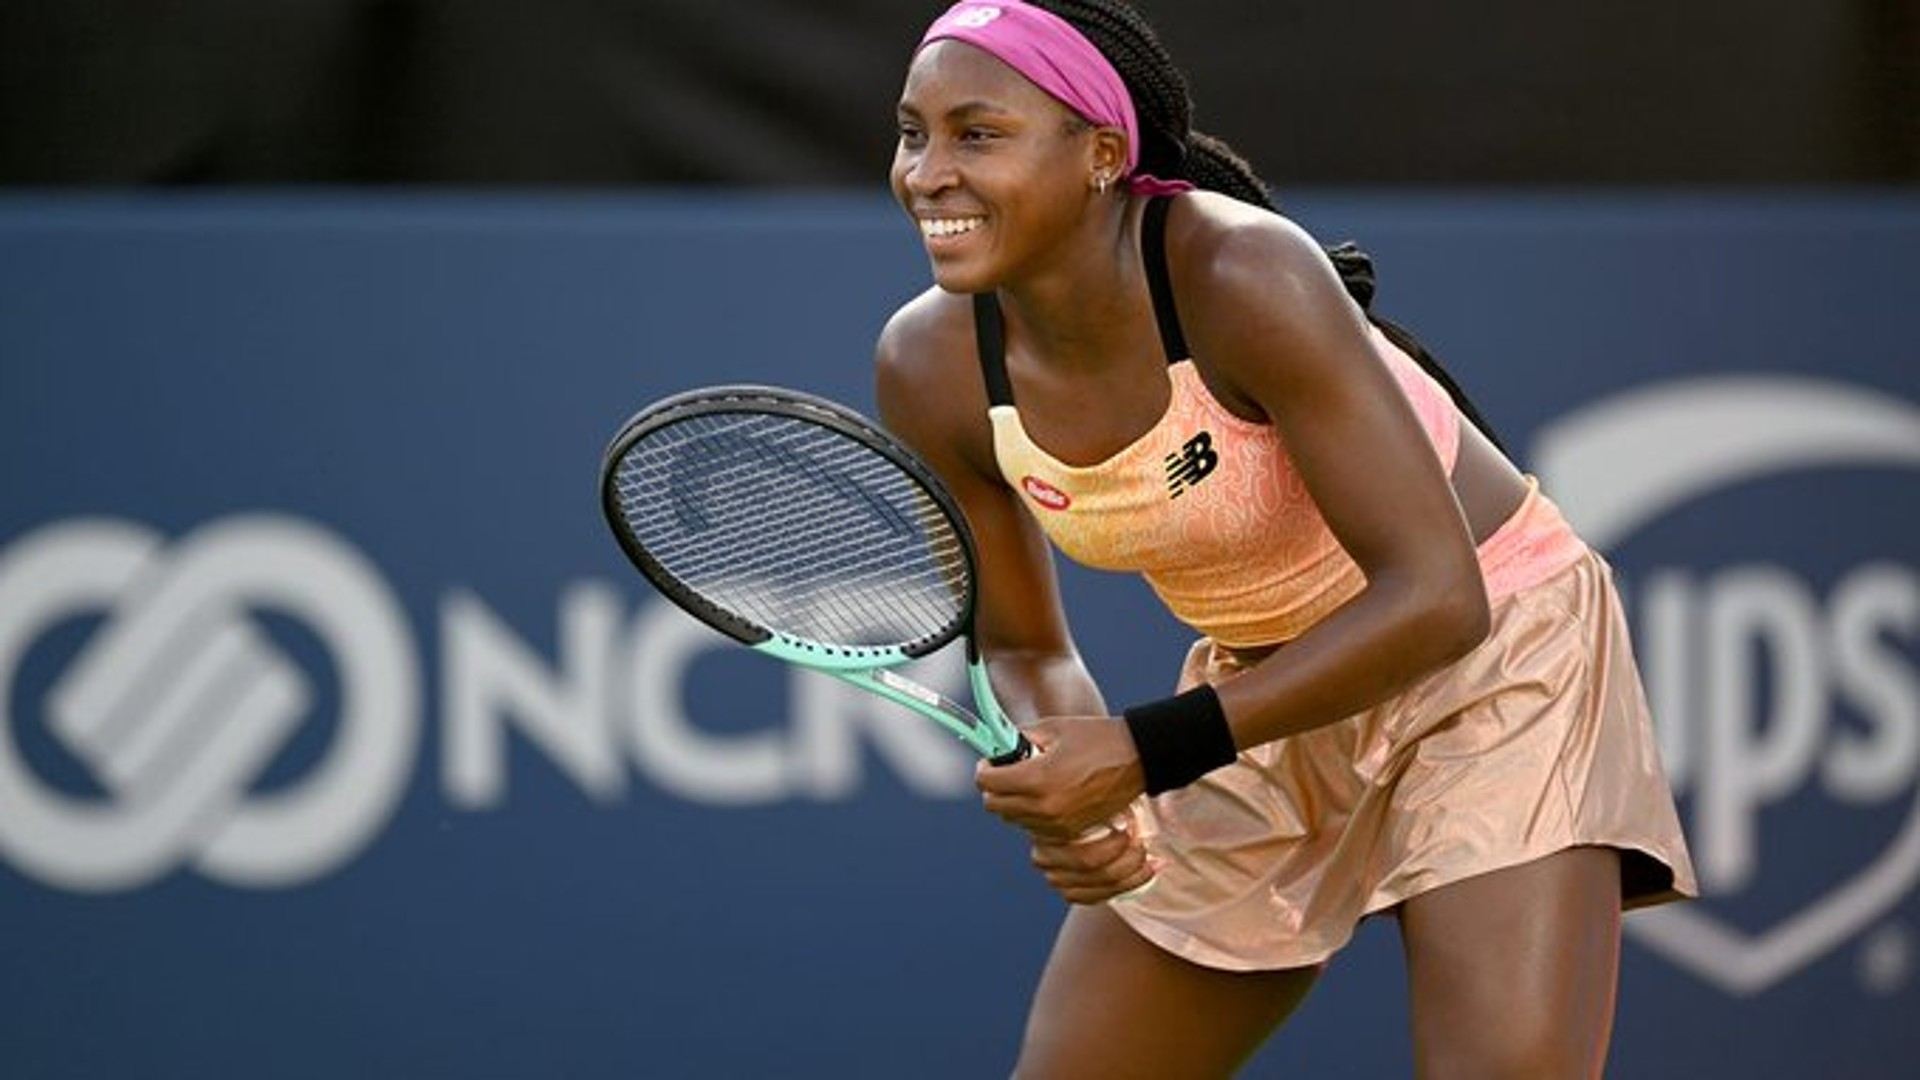 Coco Gauff in a file photo (image: twitter)